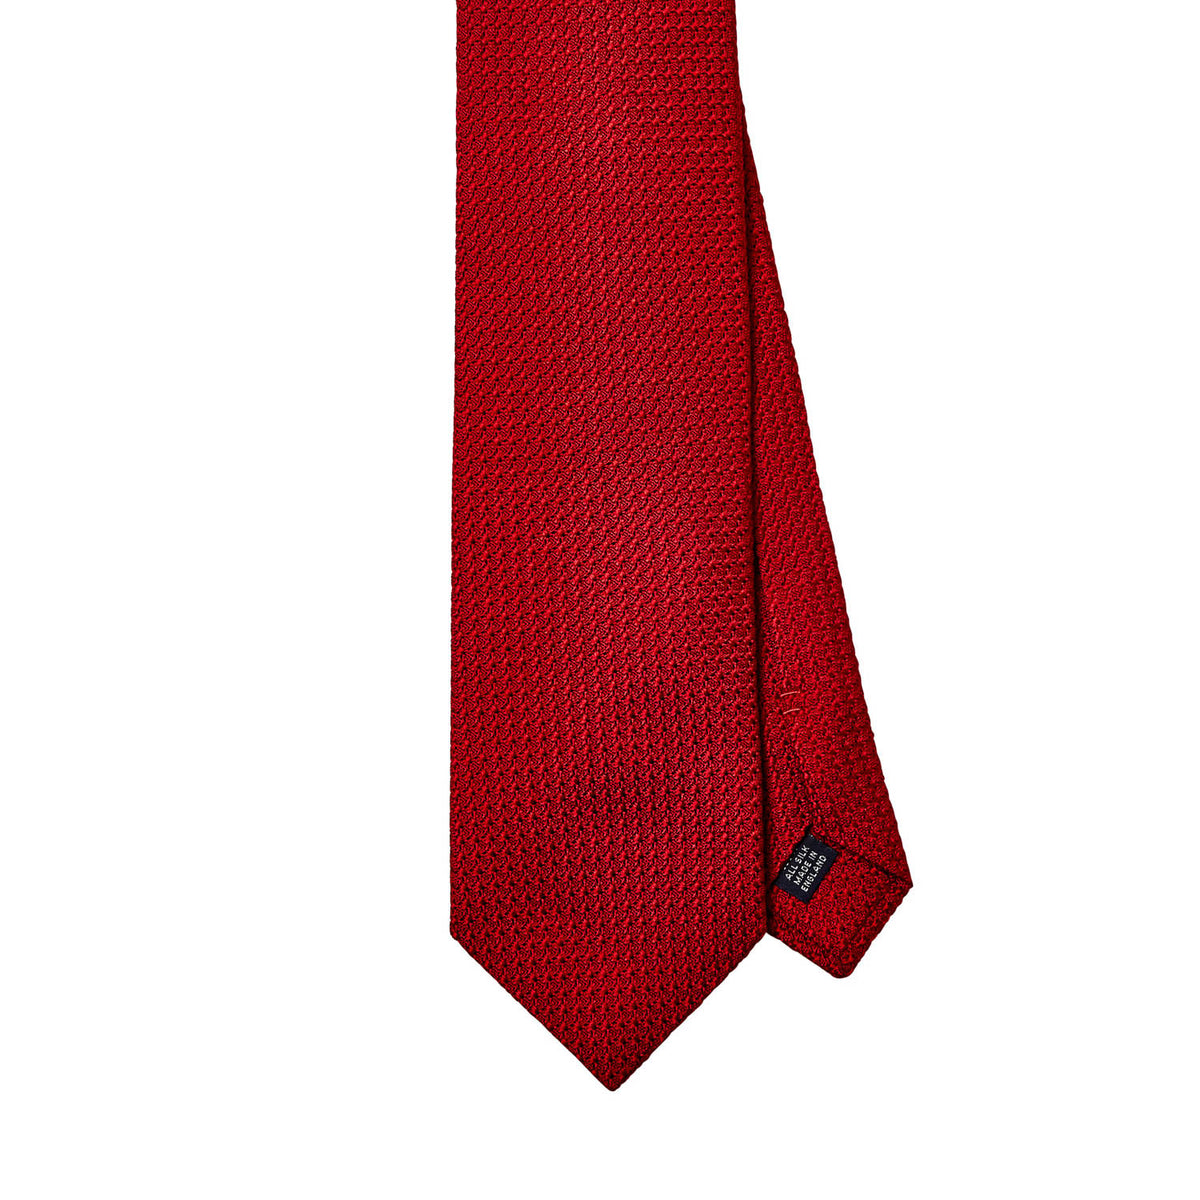 A Sovereign Grade Grenadine Grossa Red Tie by KirbyAllison.com on a white background.